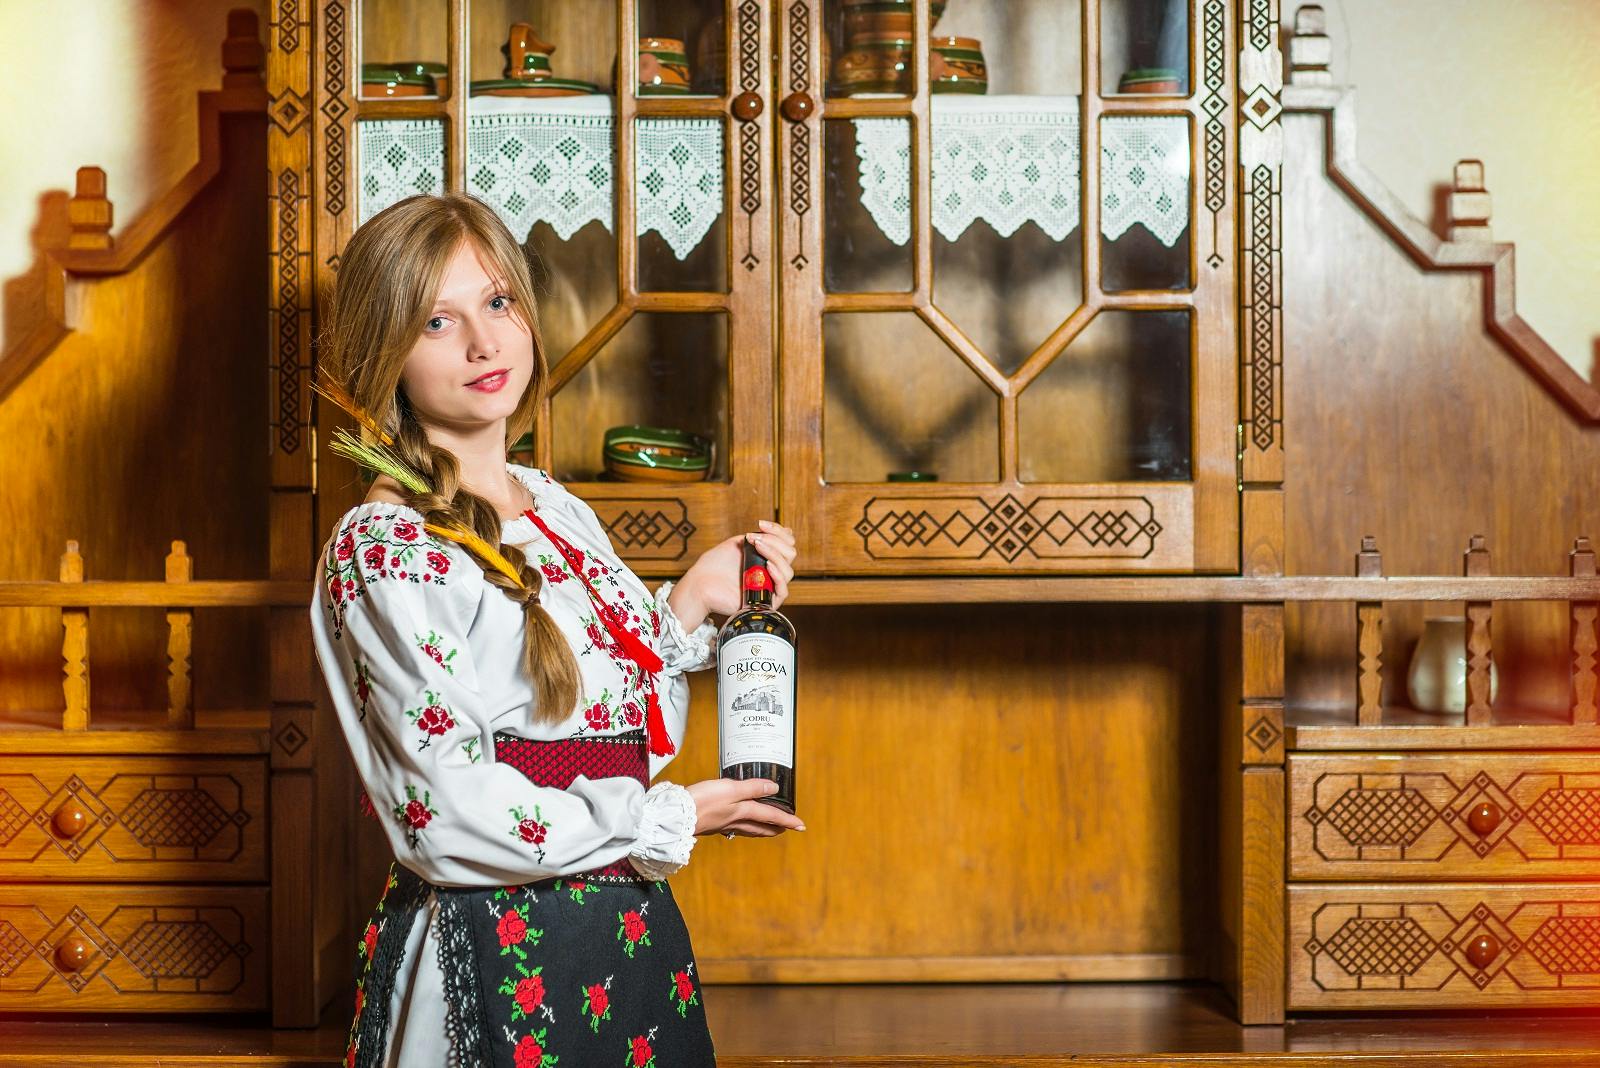 Cricova wine tour from Chisinau with tasting